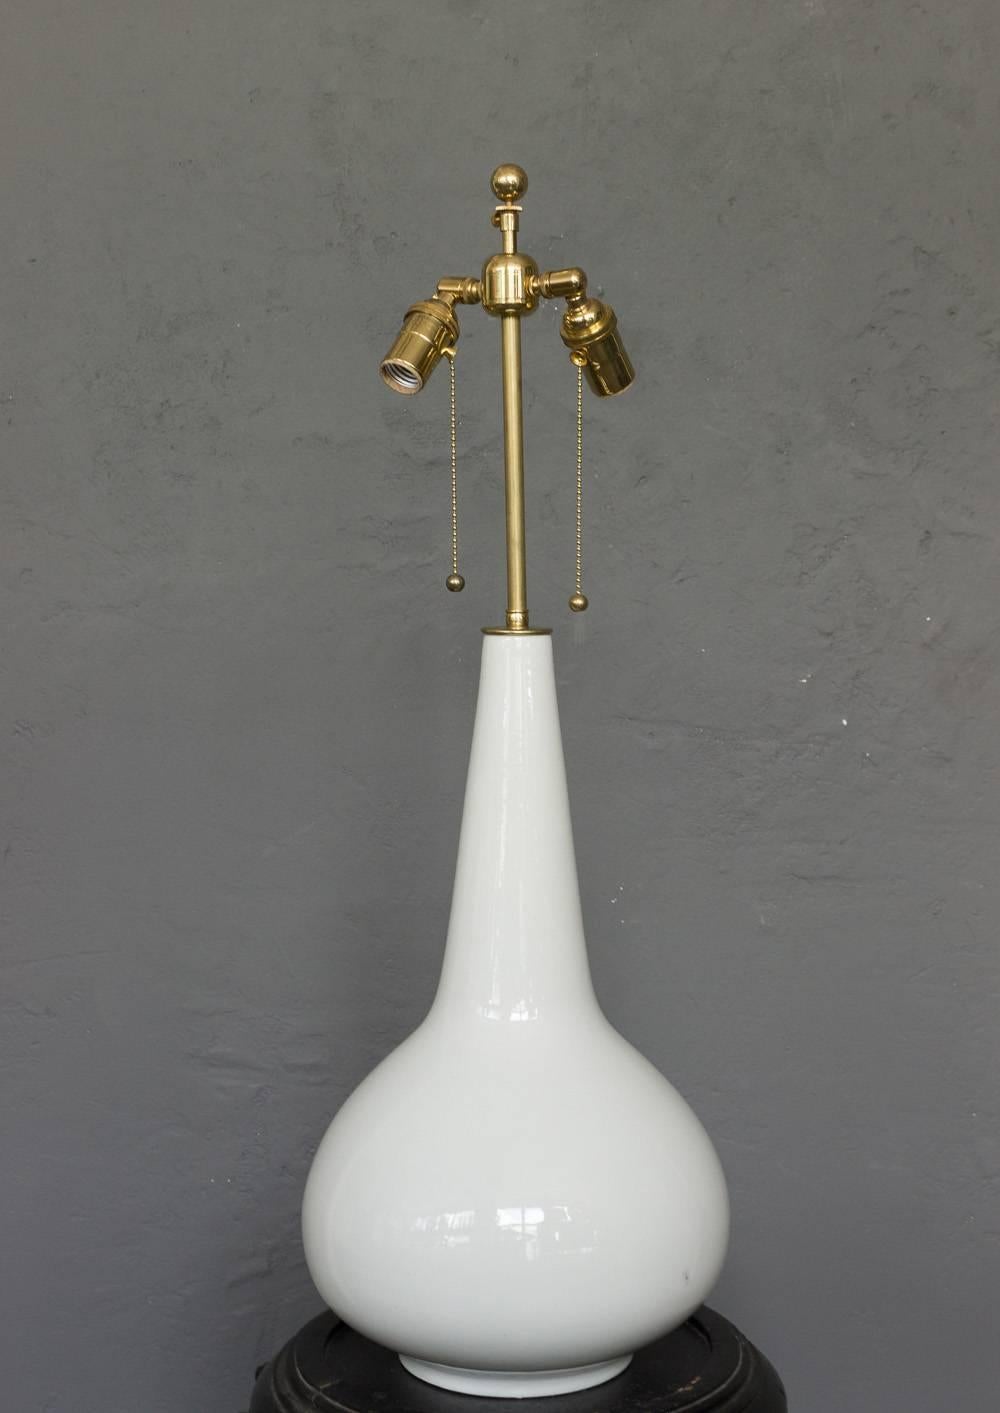 This French 1960s lamp is a wonderfully proportioned piece crafted from white glazed ceramic. It has been recently rewired with a double cluster for optimal functionality. It is in very good condition, ready to enhance any space with its timeless